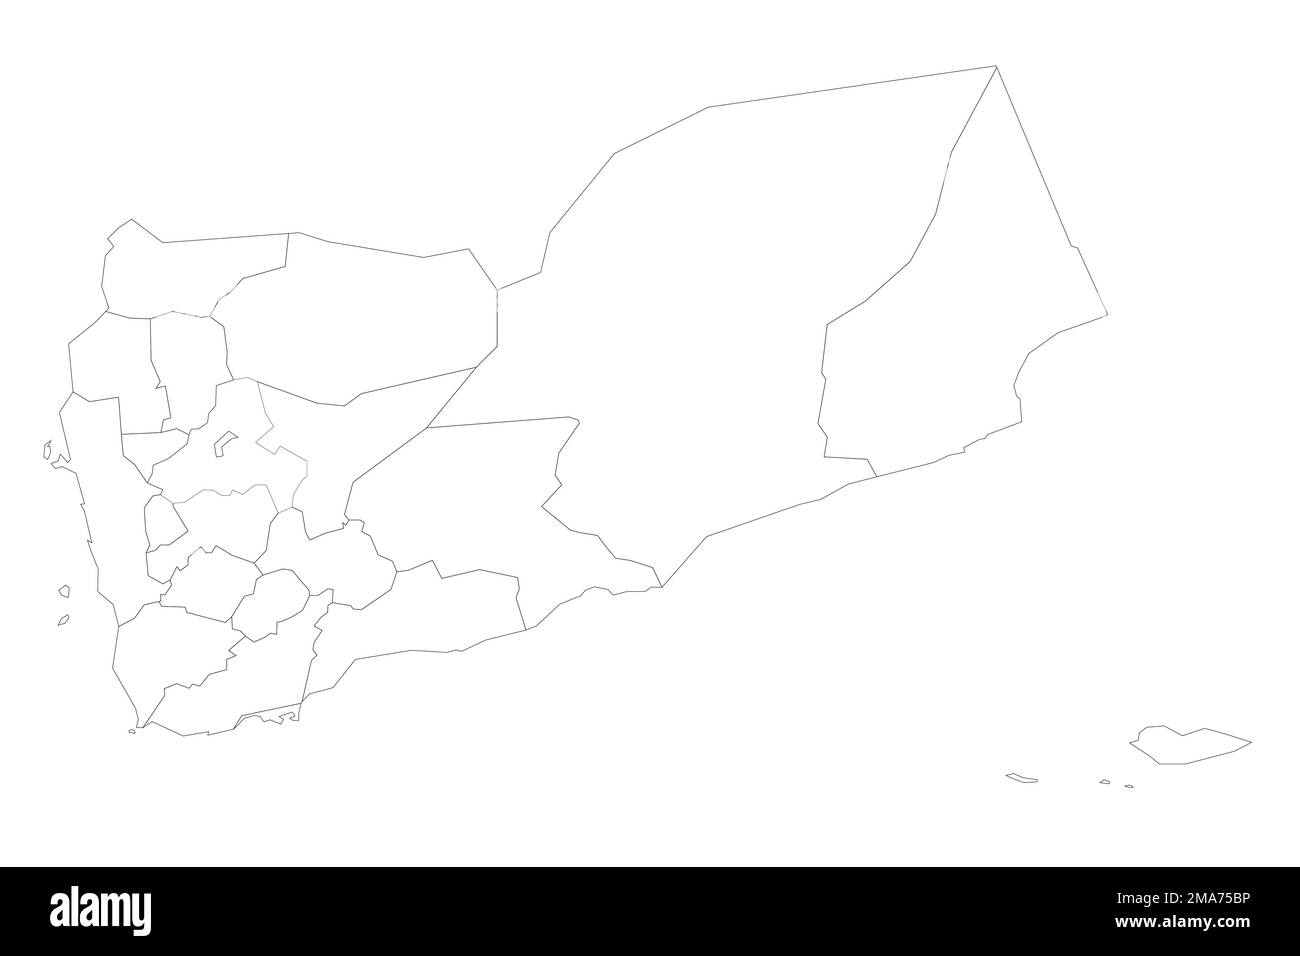 Yemen political map of administrative divisions Stock Vector